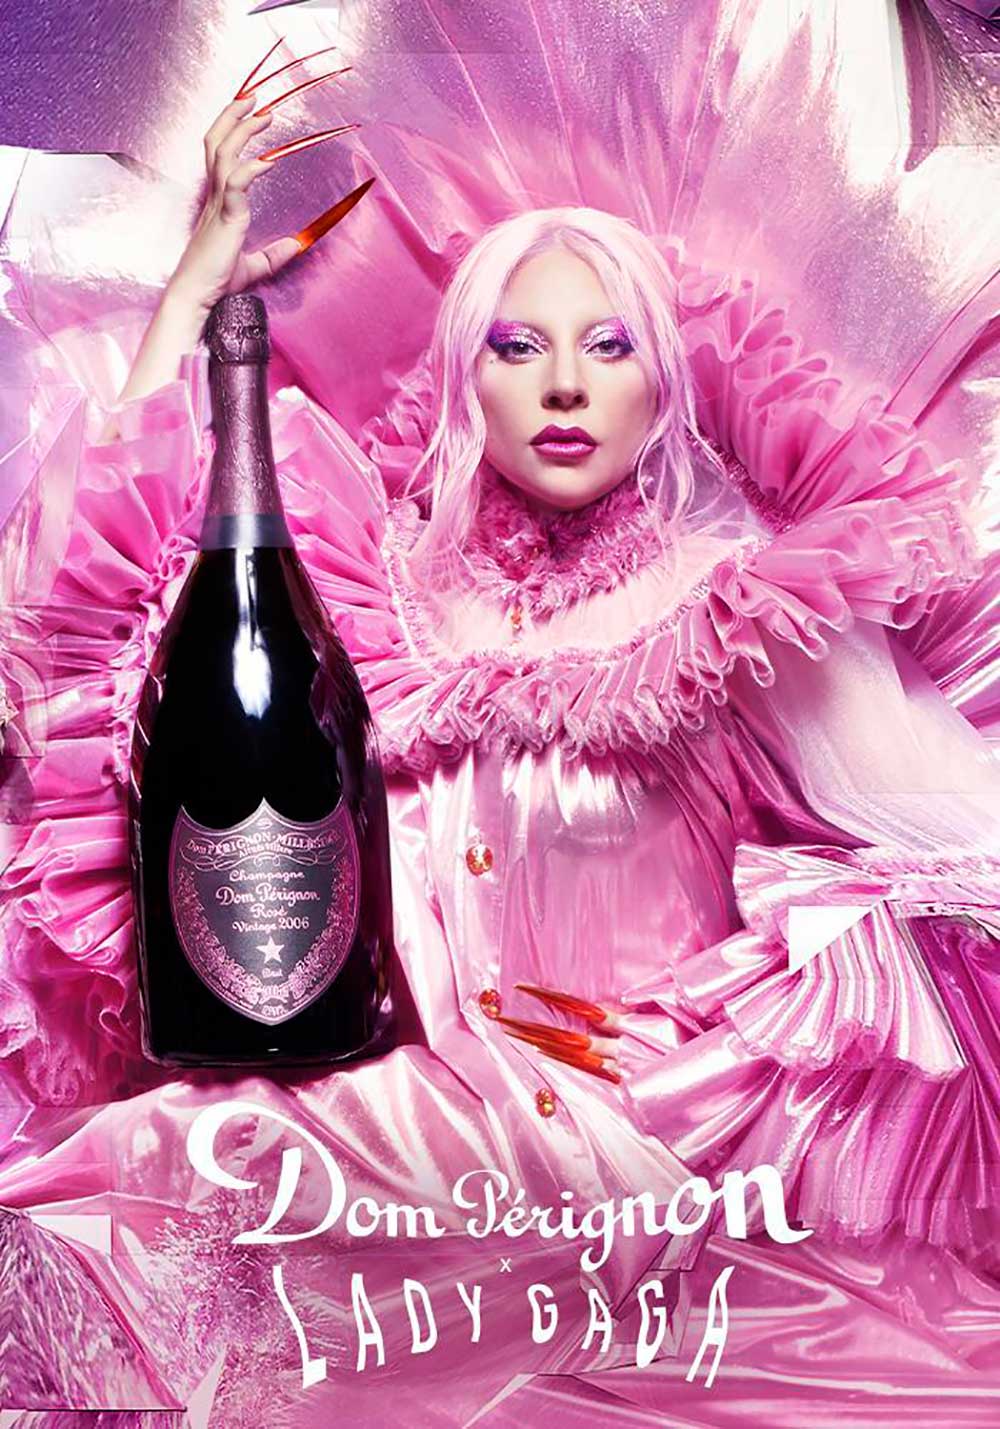 The collaboration between Dom Pérignon and Lady Gaga